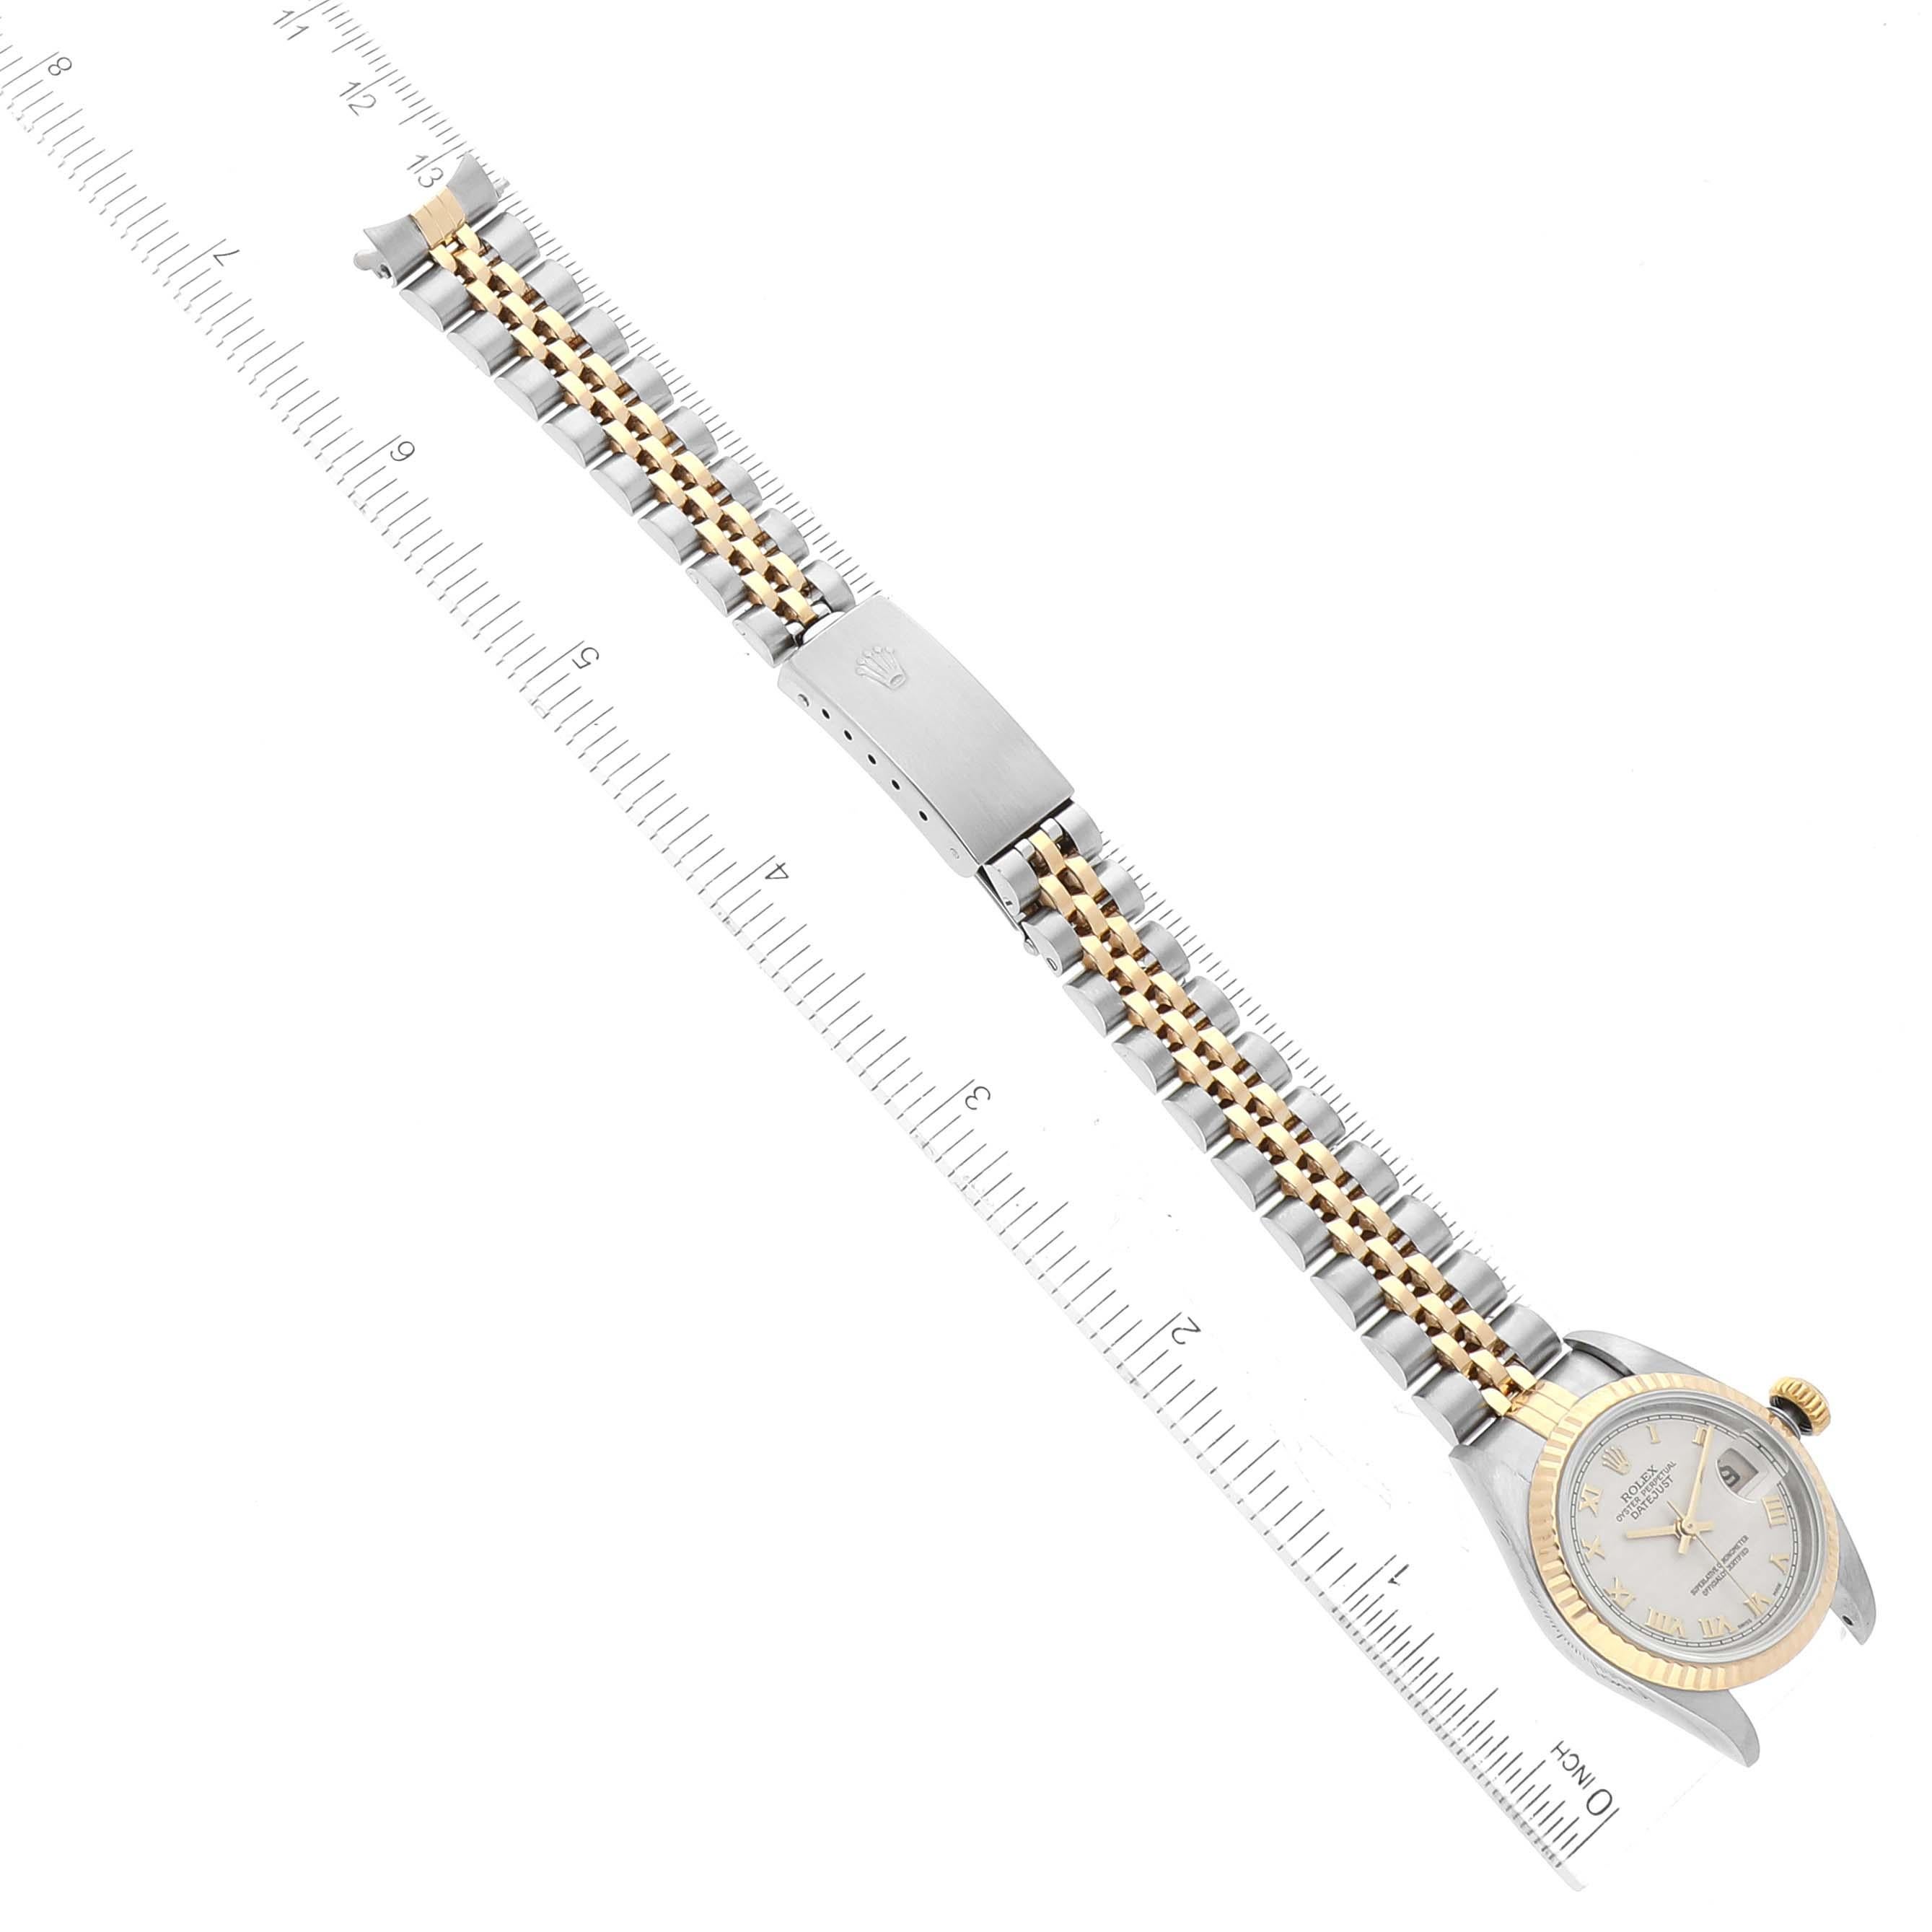 Rolex Datejust Steel Yellow Gold Ivory Pyramid Dial Ladies Watch 79173 6